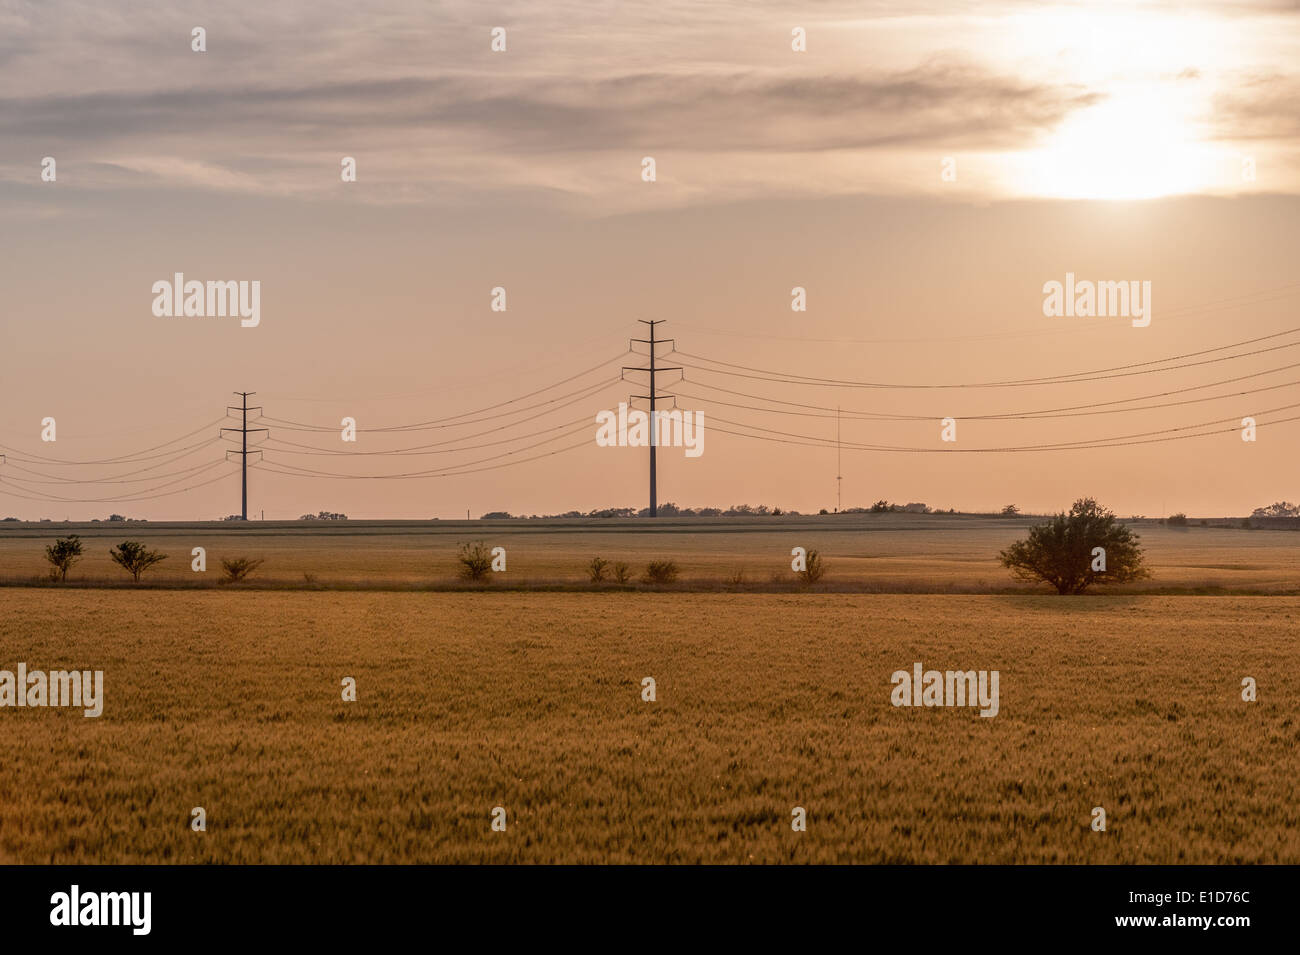 Prairie Sunrise with wheat field in the foreground and power transmission lines on the horizon line Stock Photo